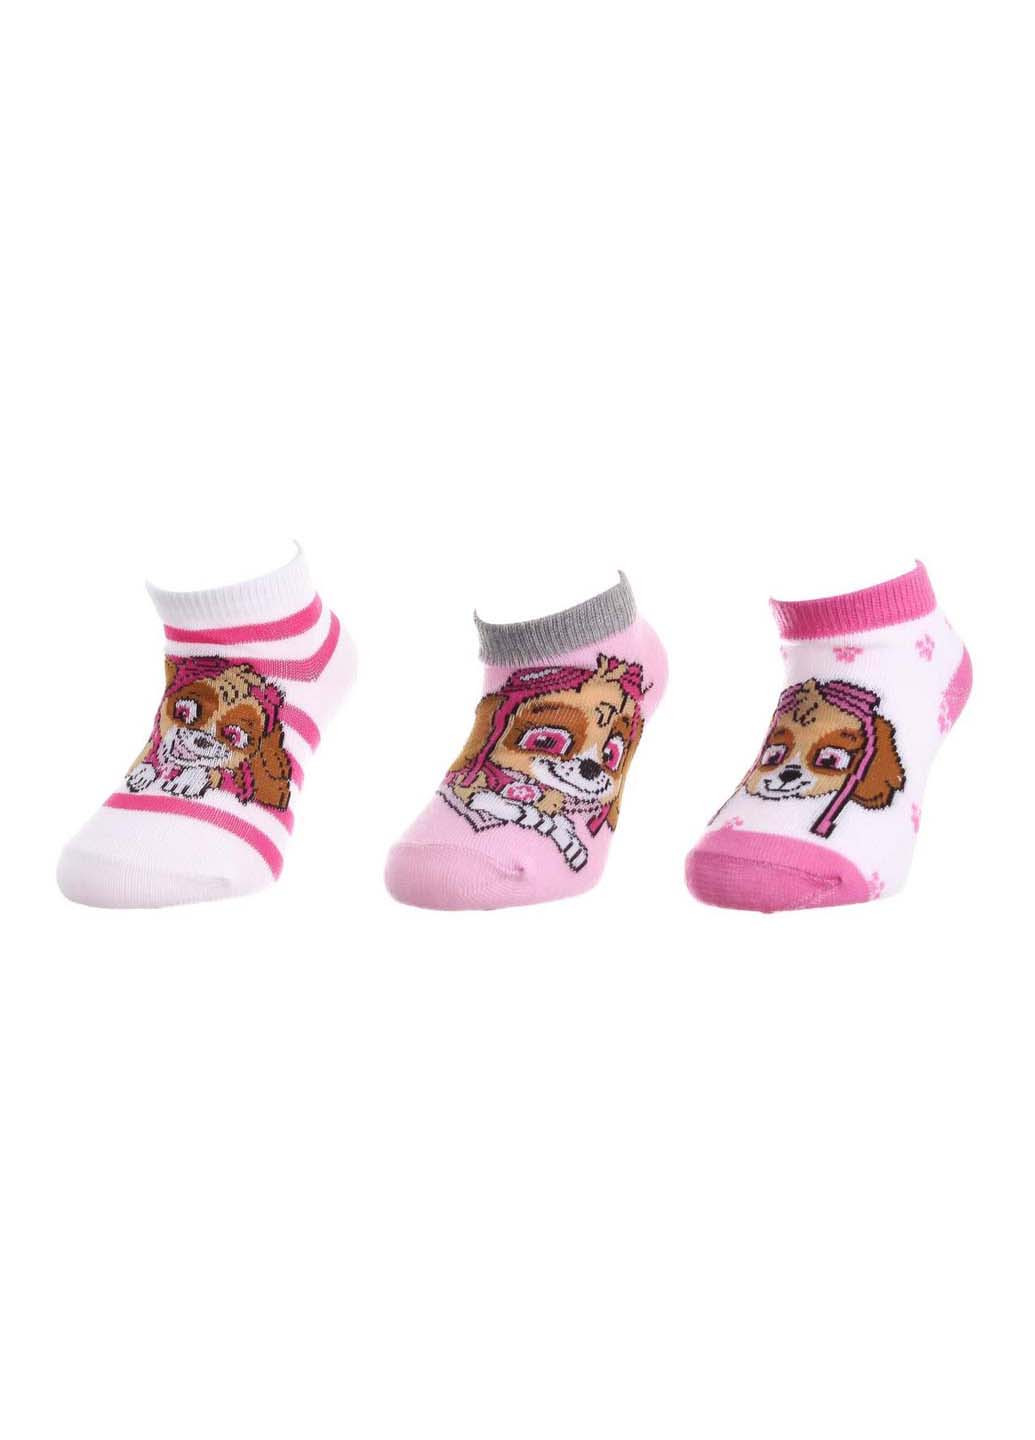 Шкарпетки Paw Patrol stella and pea/stella and happy/stella in total 3-pack (256036701)